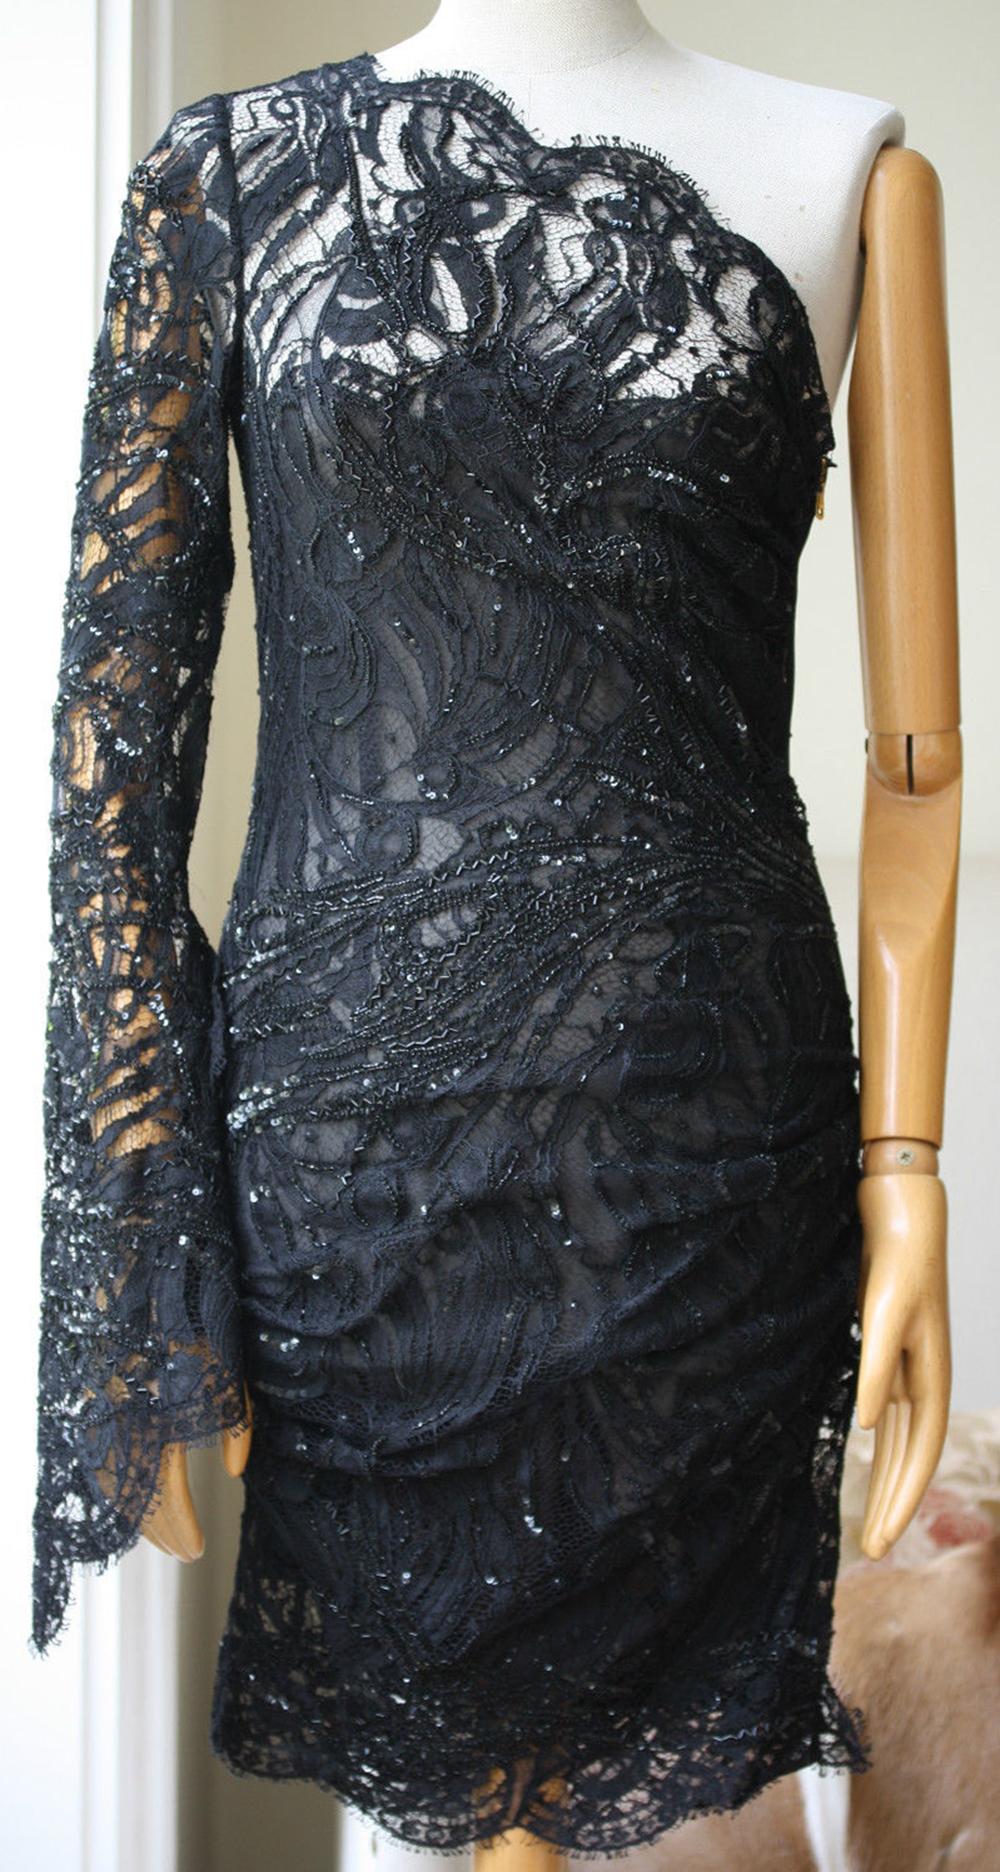 Make a statement at your next event in Emilio Pucci's one-shoulder black lace dress. This curve-skimming design has a long draping sleeve, flattering ruching along the body, delicate eyelash trims and exquisite sequin embellishment. 100% Silk